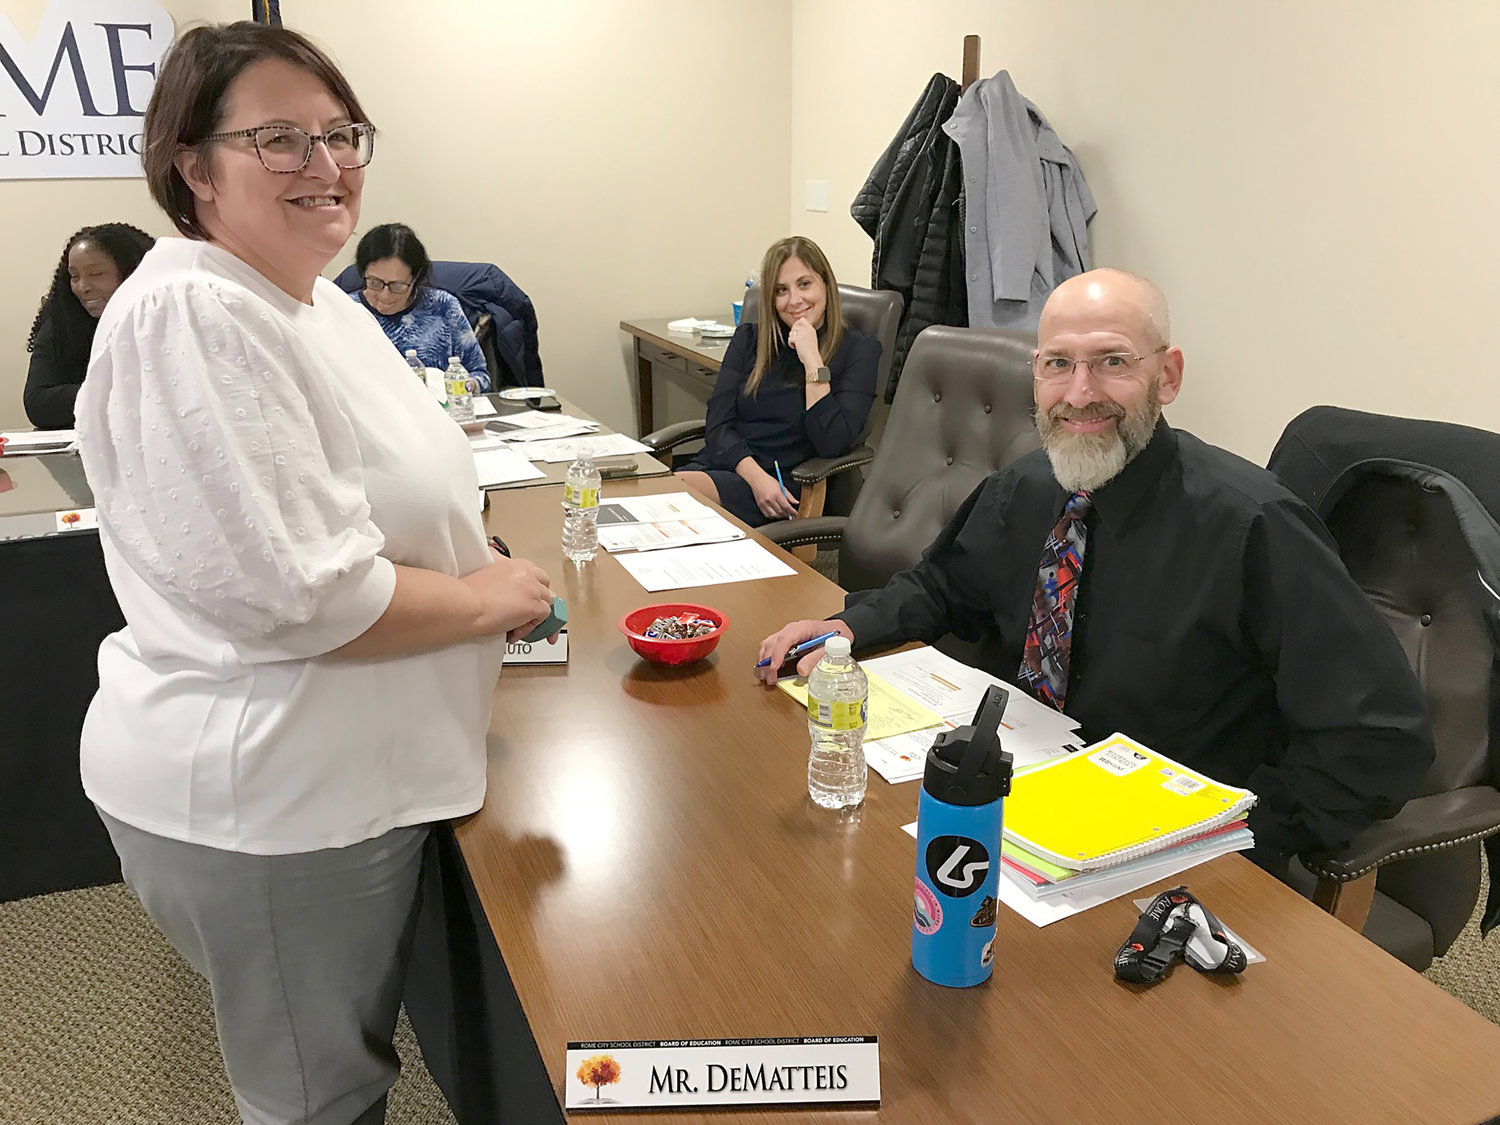 Rome City School District Personnel Assistant Shelly Schultheis, left, welcomes new Board of Education member Jeff DeMatteis at the board’s Nov. 28 meeting.